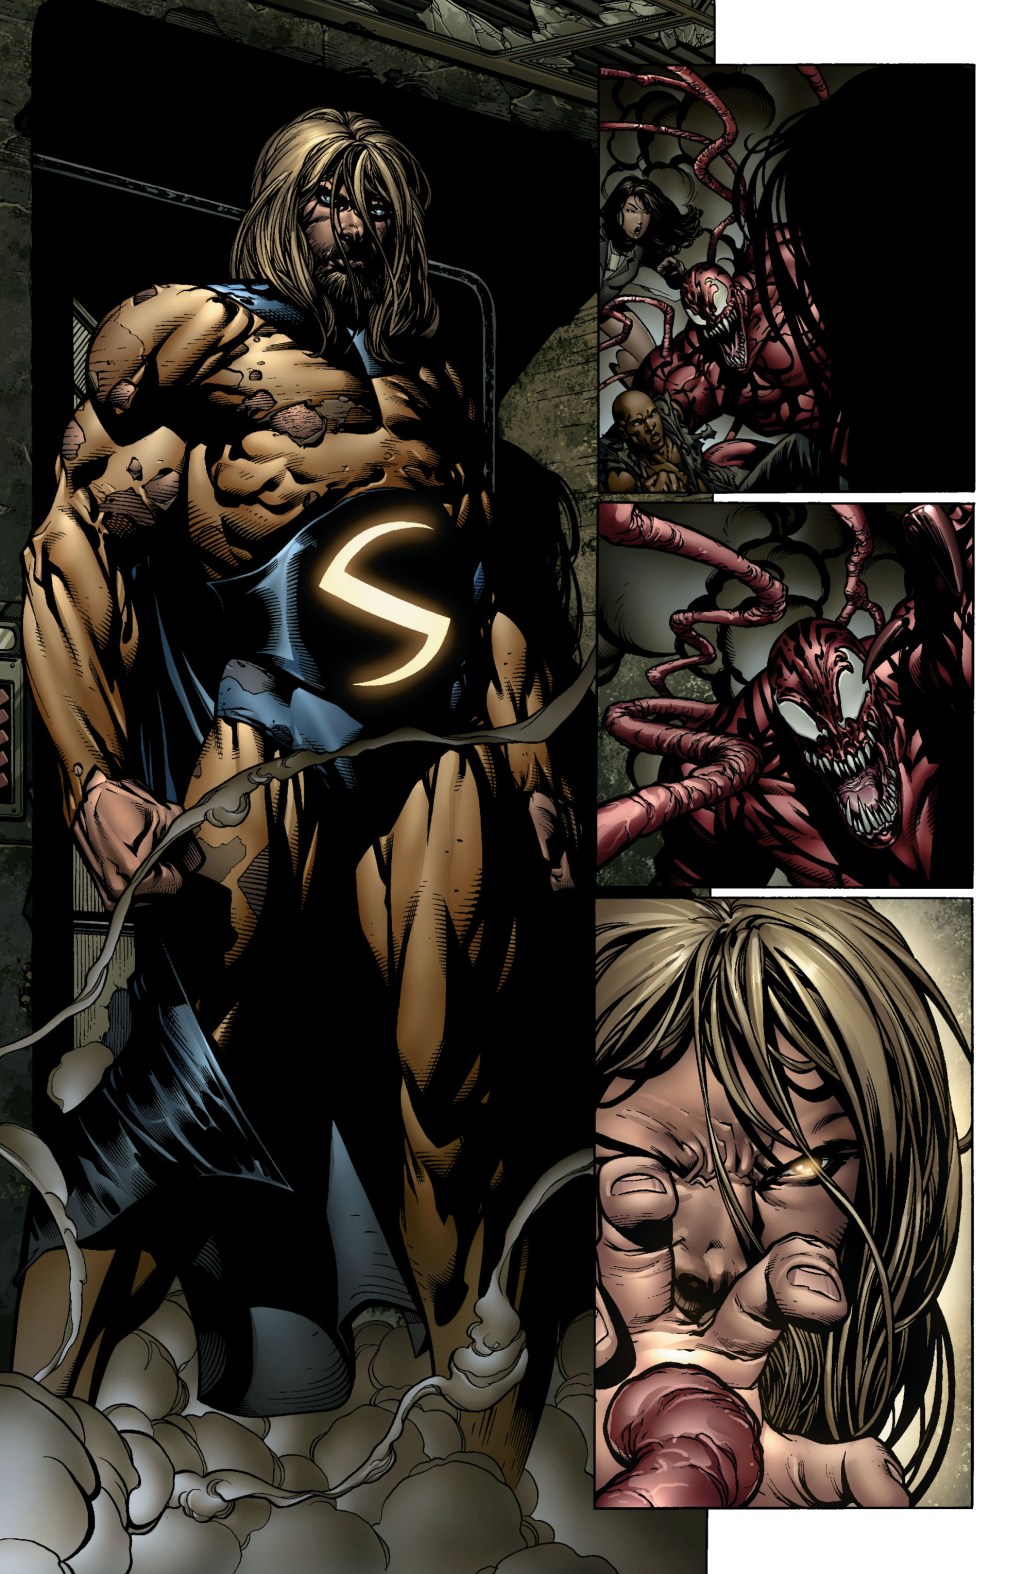 The Sentry prepares to put an easy end to Carnage in New Avengers Vol. 1 #2 "Breakout!: Part 2" (2004), Marvel Comics. Words by Brian Michael Bendis, art by David Finch, Danny Miki, Mark Morales, Frank D'Armata, Richard Starkings, and Albert Descehesne.